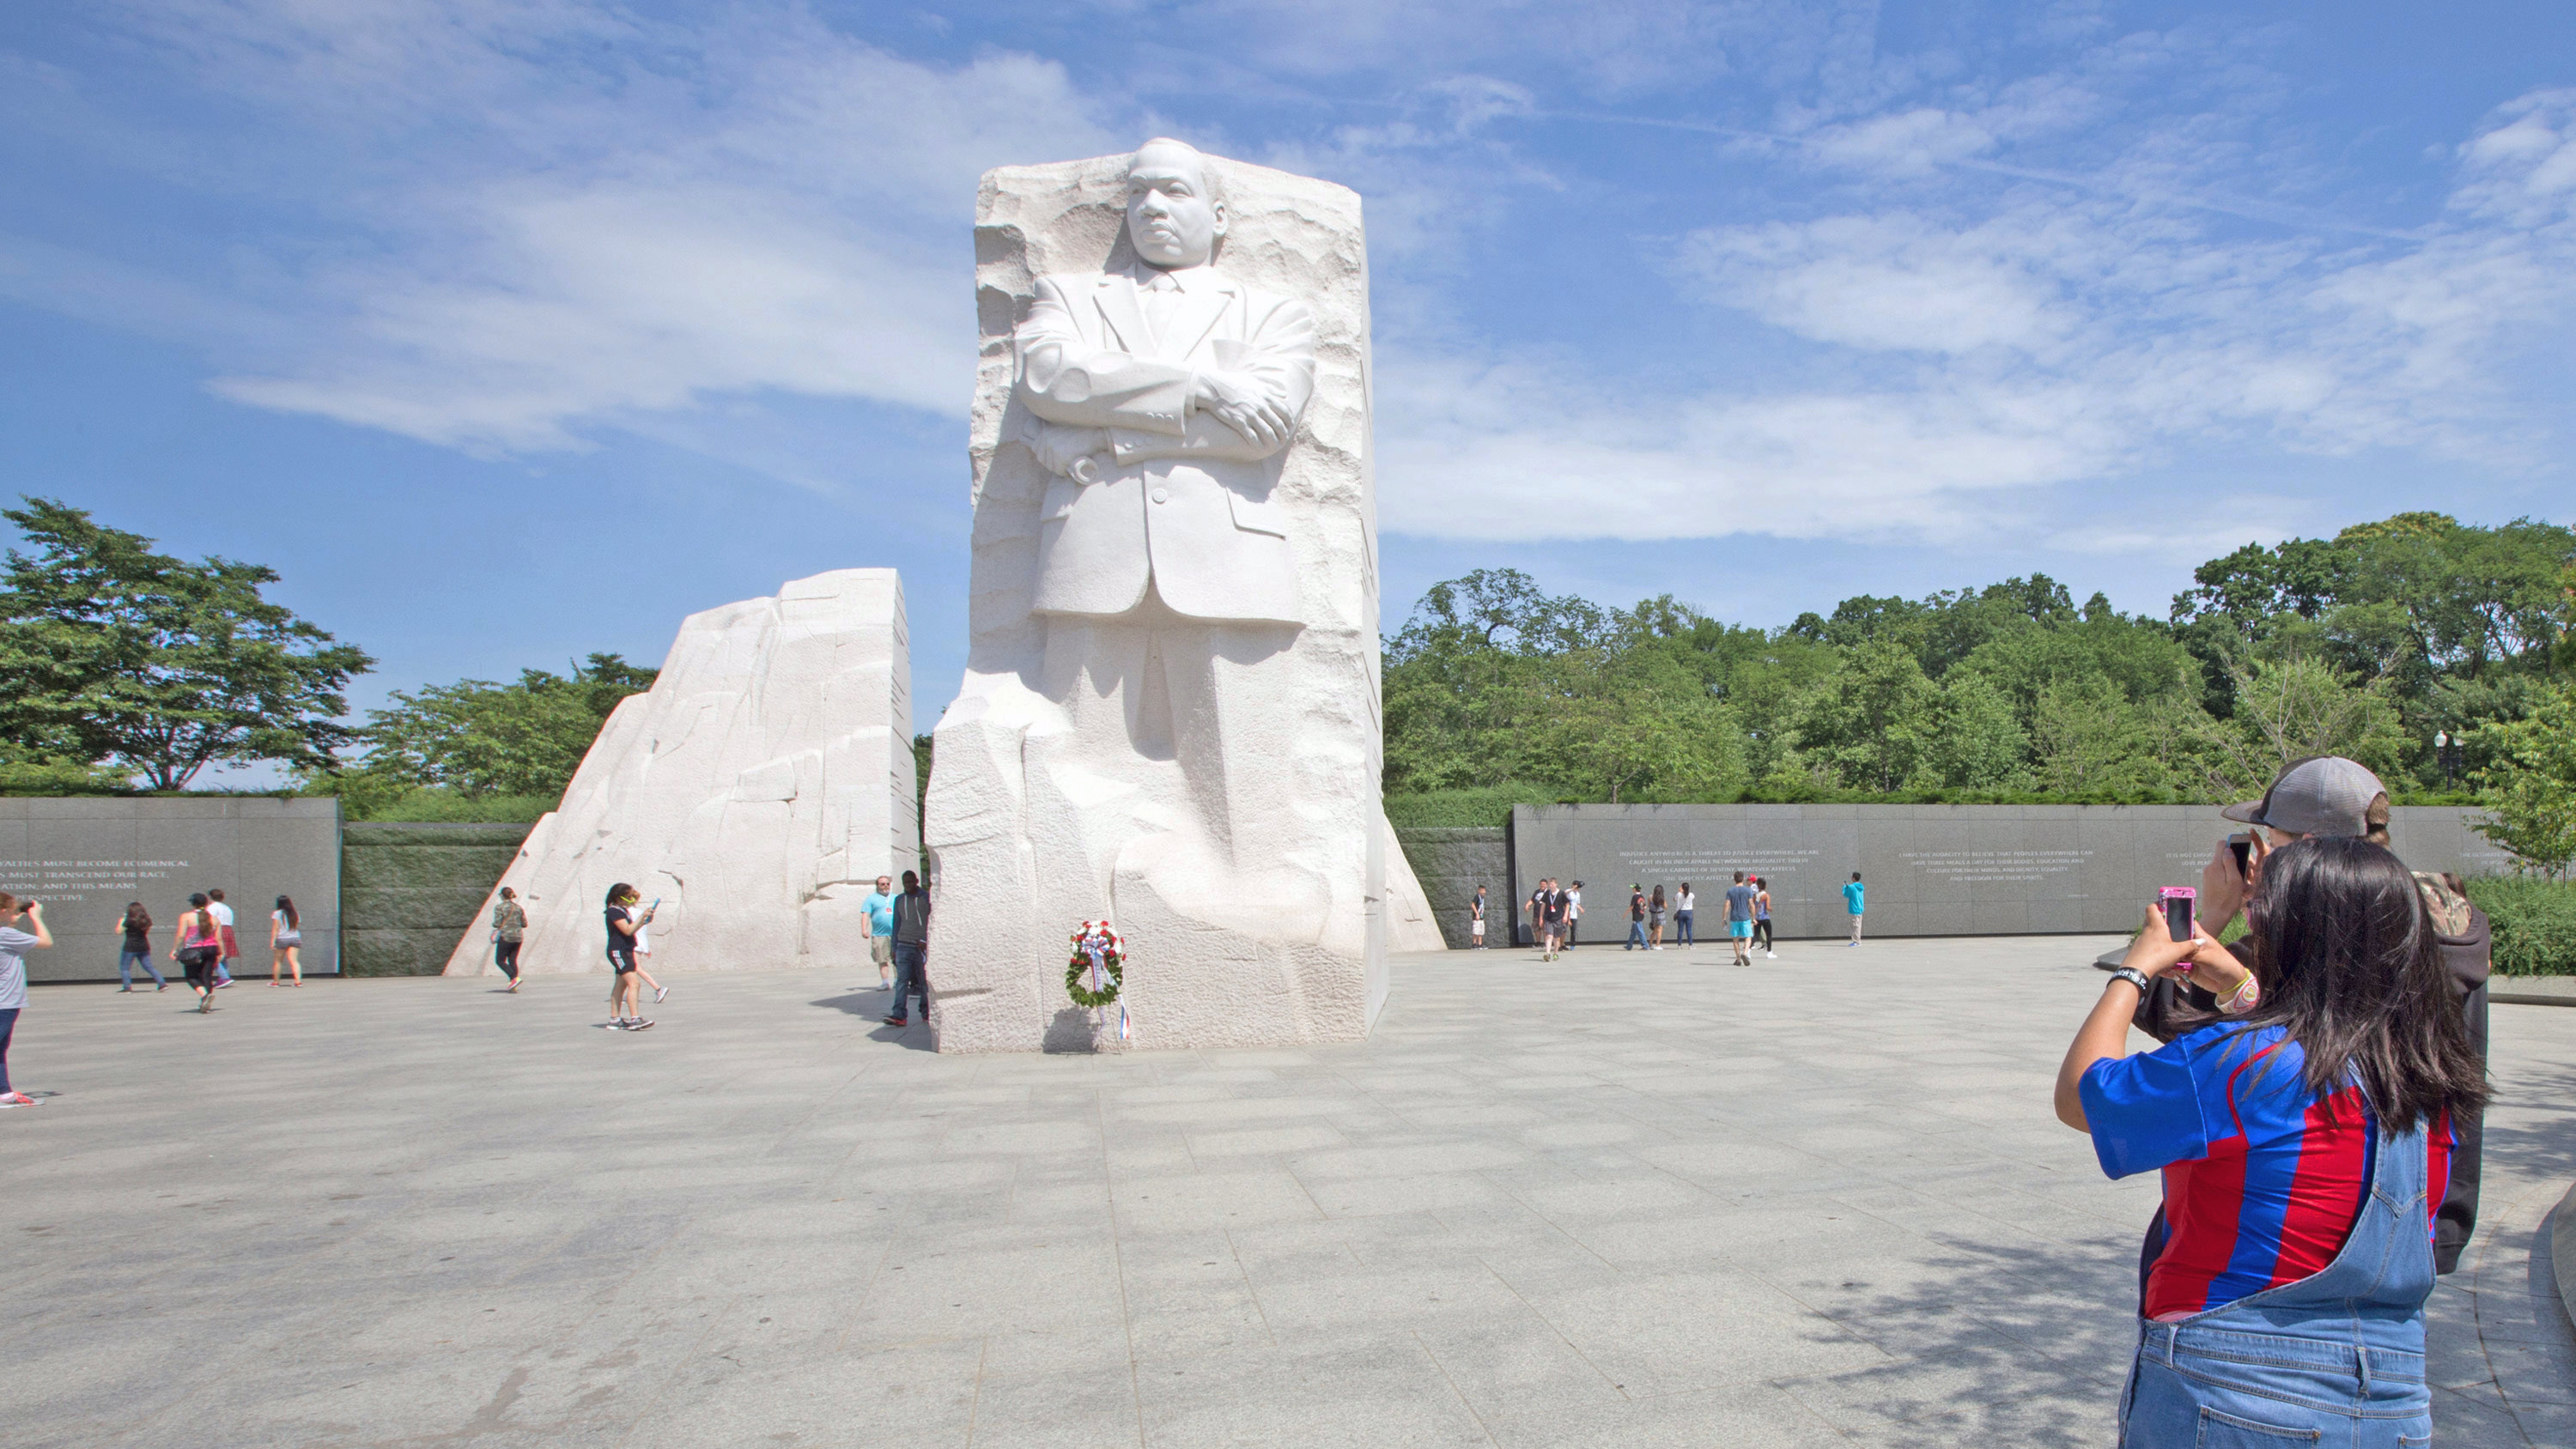 Interesting facts about the Martin Luther King, Jr. Memorial - WorldStrides